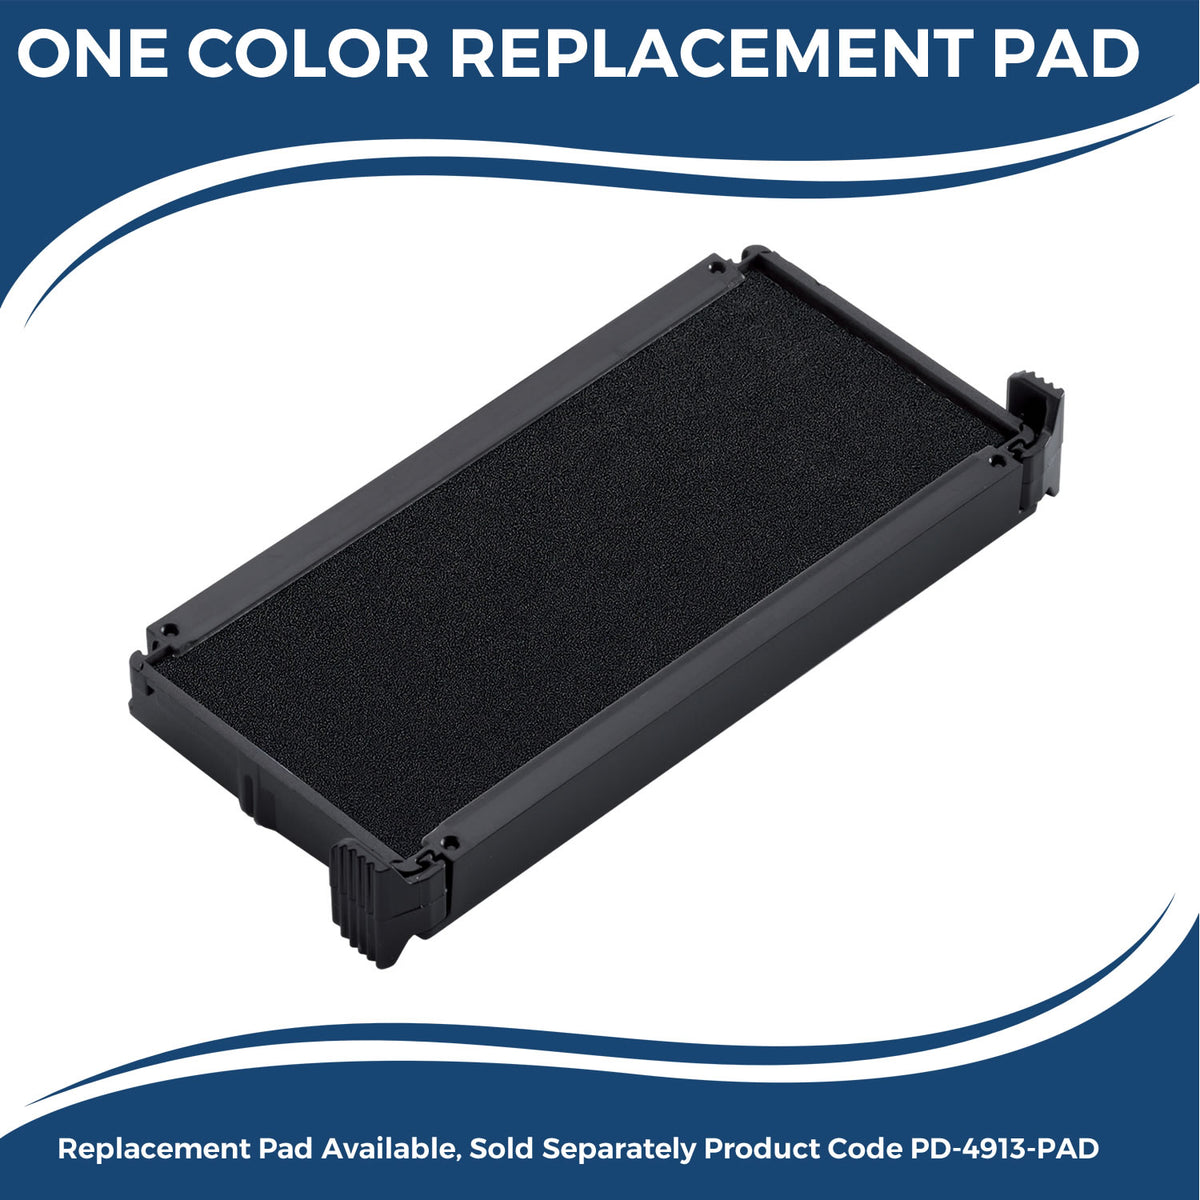 Large Self-Inking Borrador Stamp 5532S Large Replacment Pad